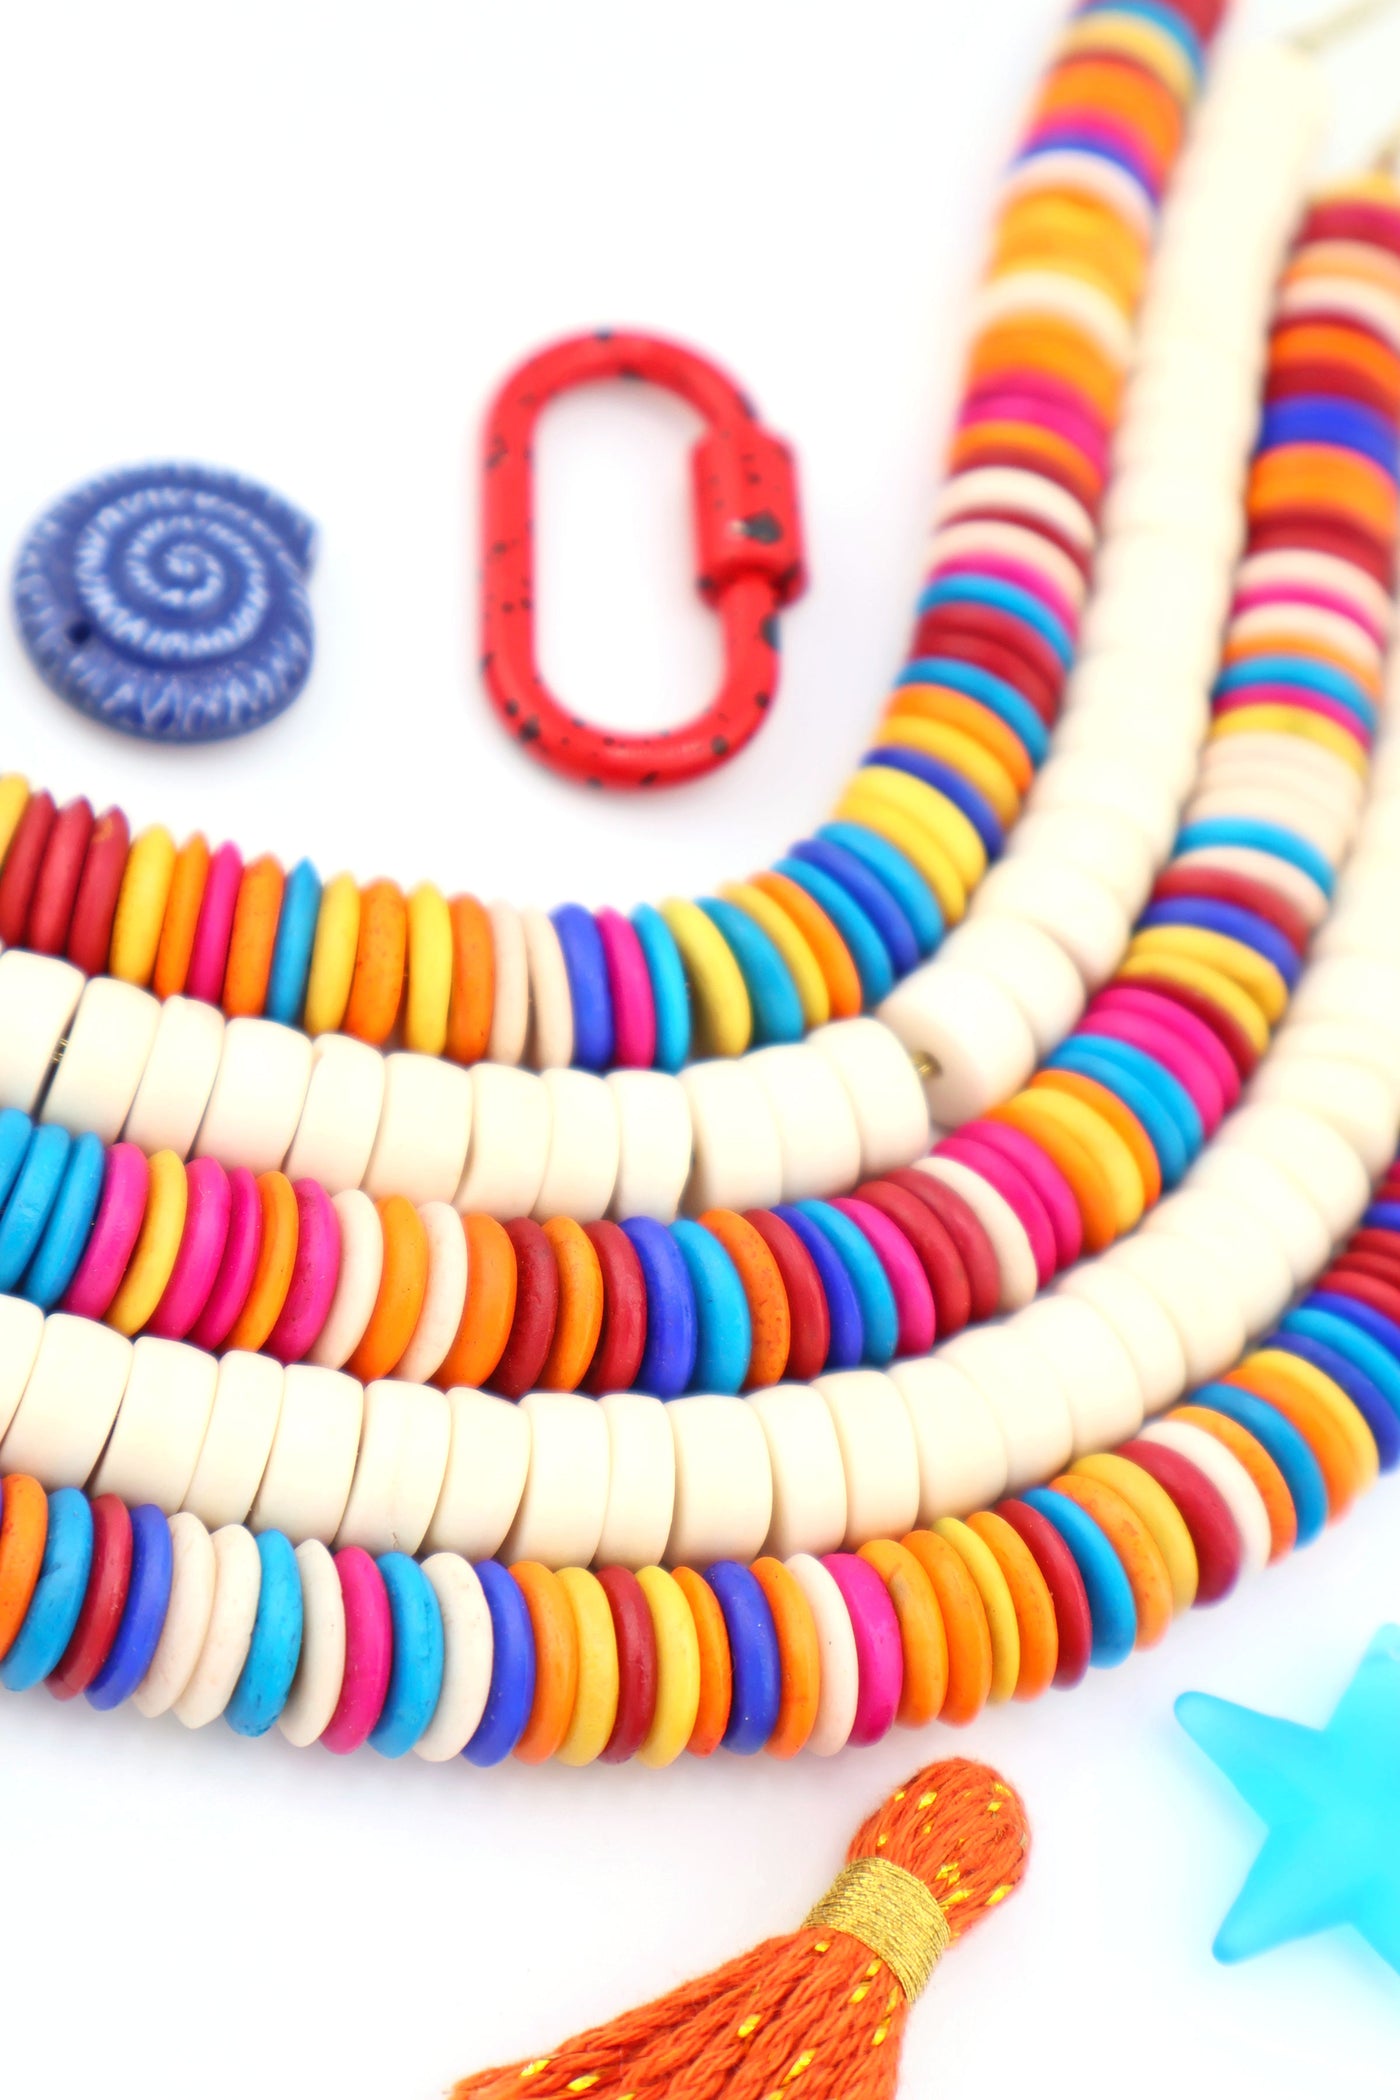 Bead Bundle: Tropical Heishi, Colorful Disc Beads, 10-11mm, 5 Strands, 360+ Beads